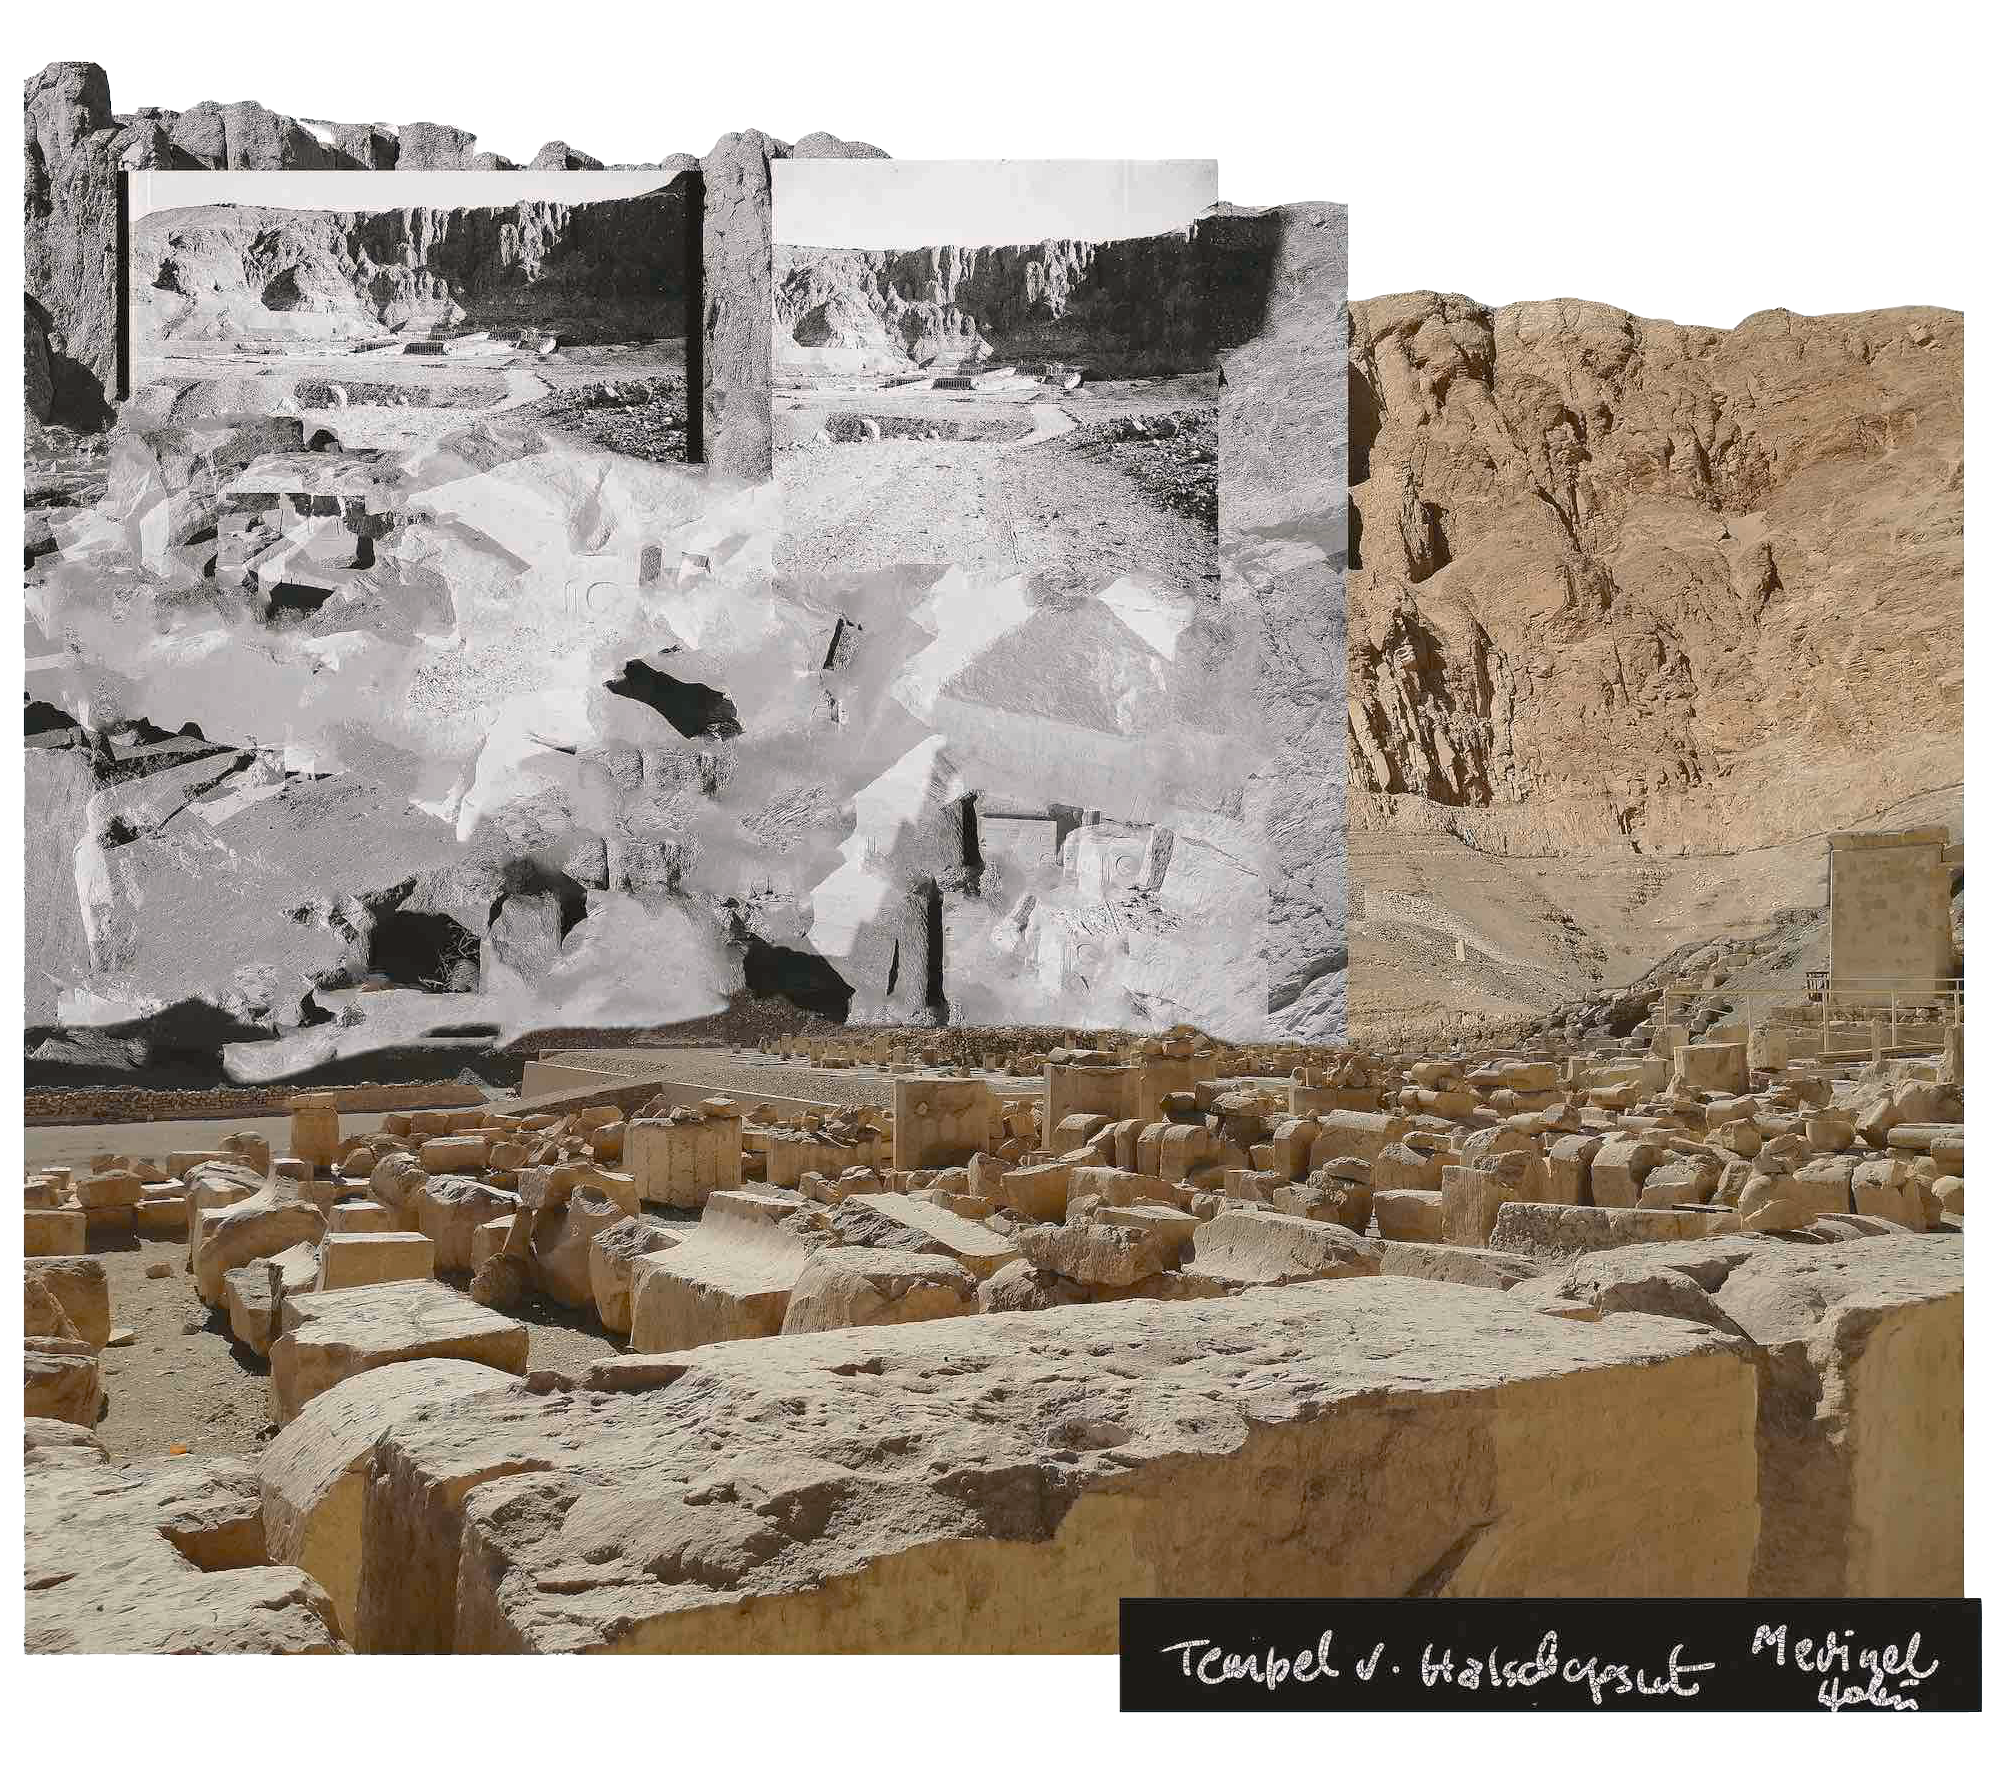 Two images superimposed depicting ruins of Hatshepsut's temple in Egypt